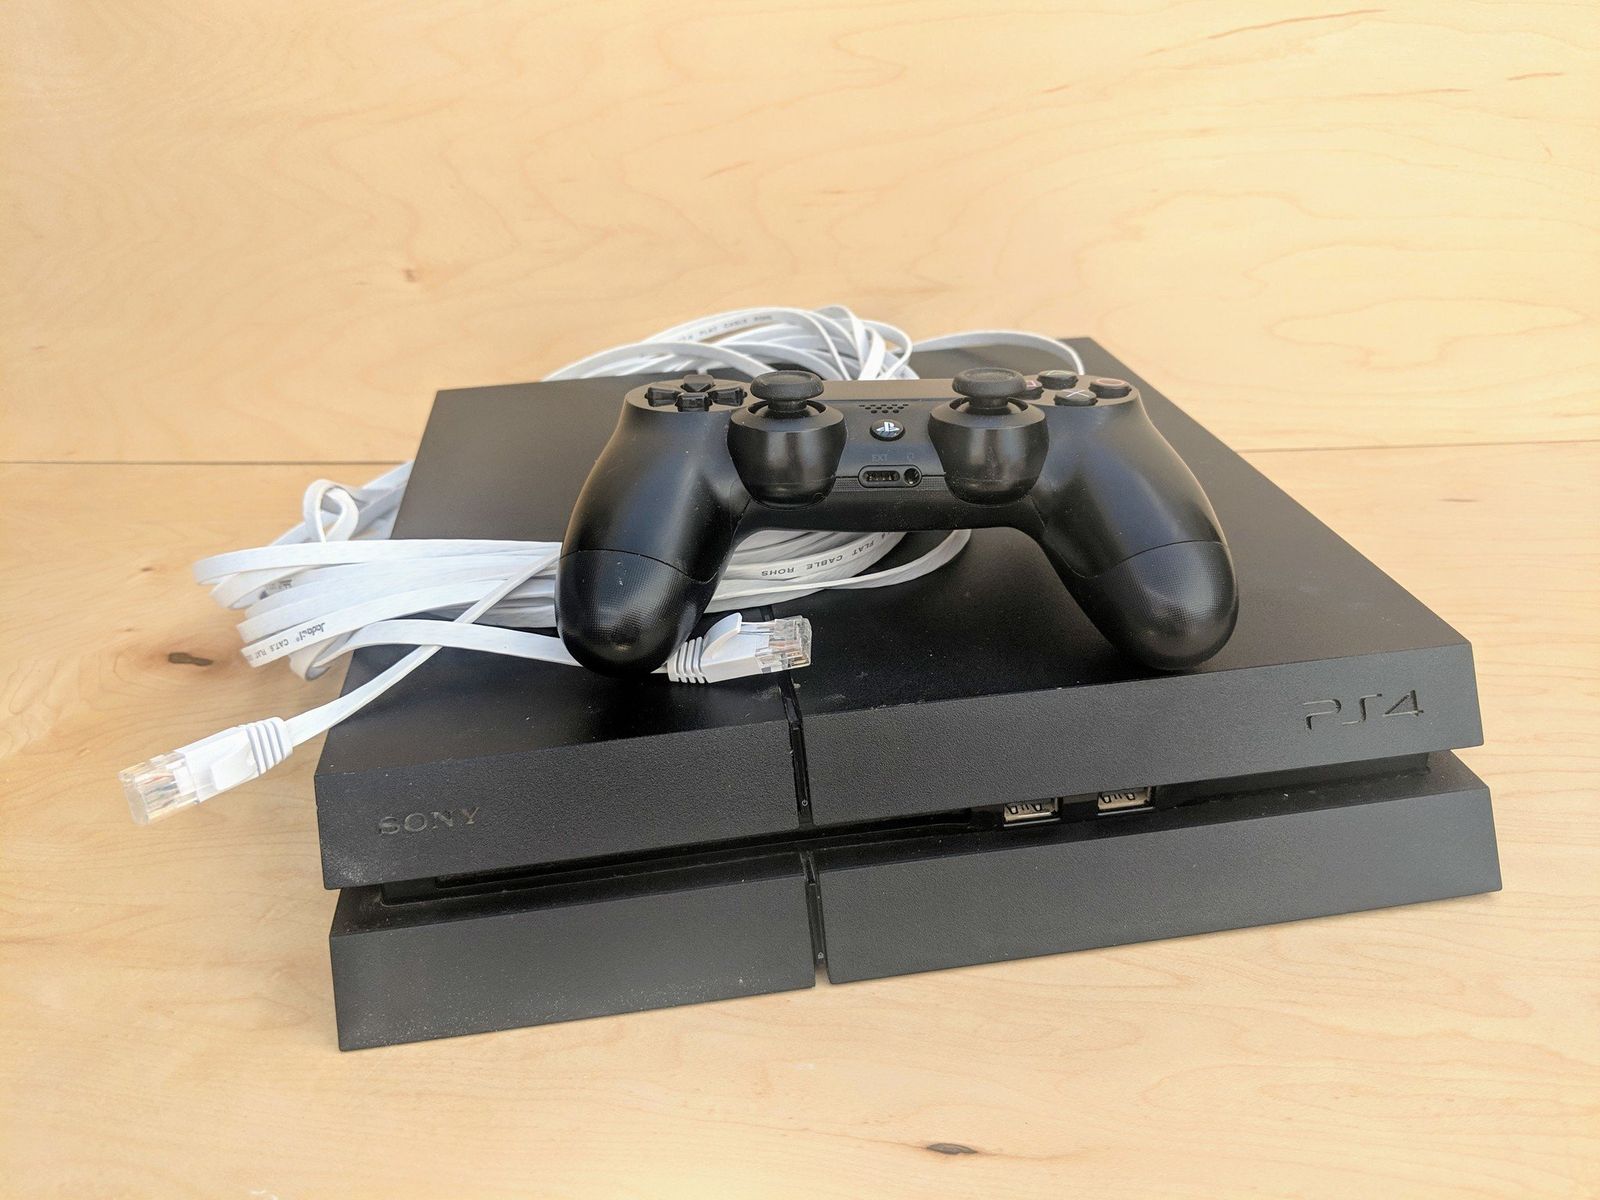 PS4 and Ethernet cord